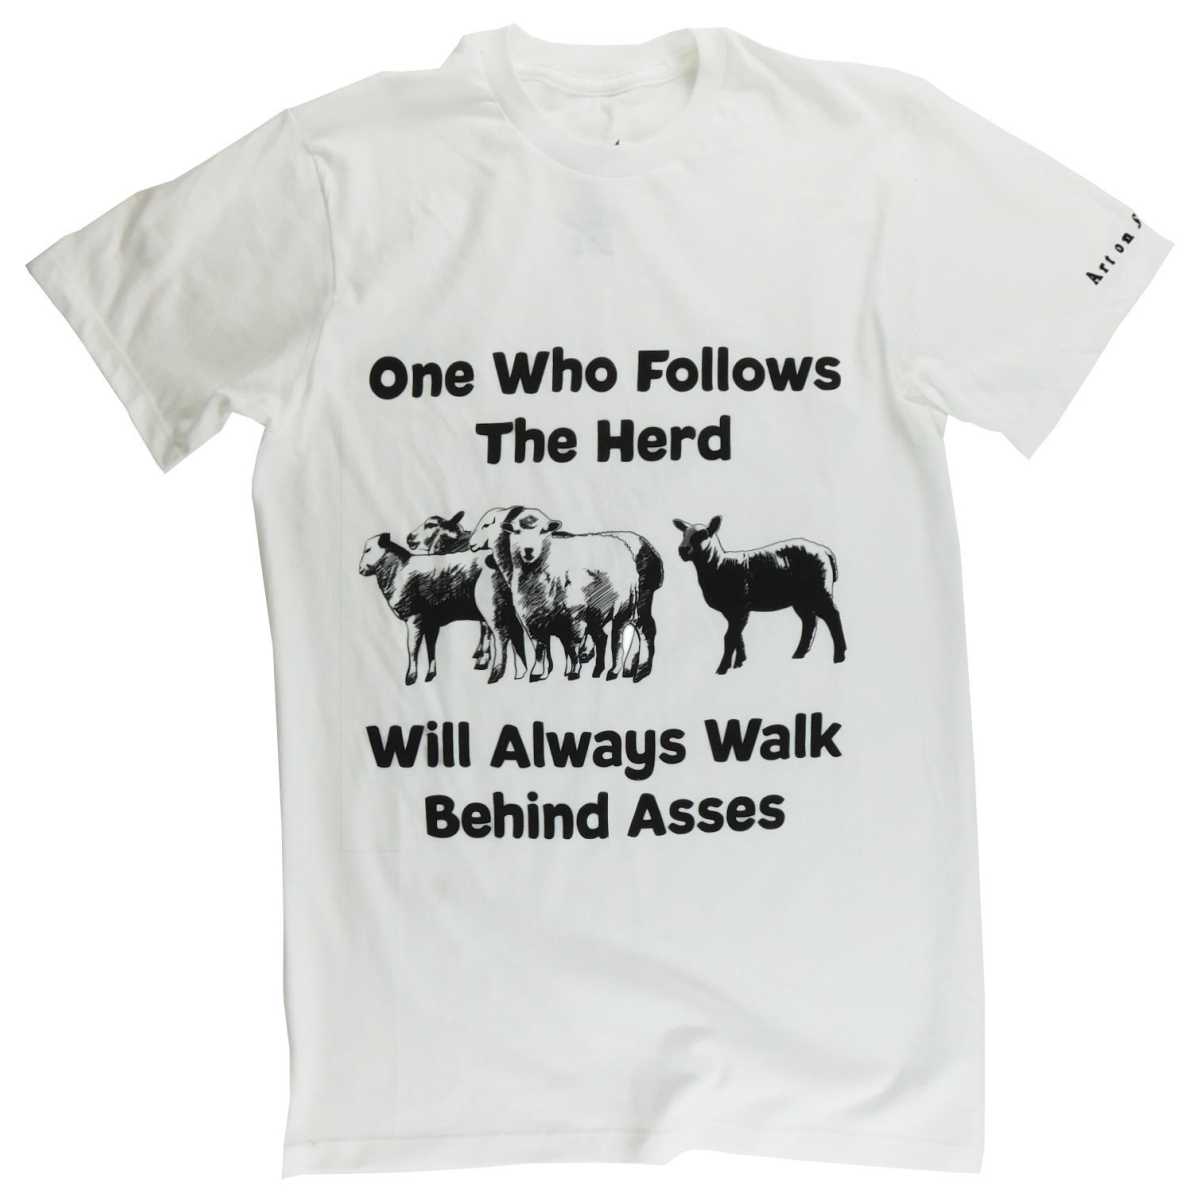 One who follows the herd will always walk behind asses - An out-of-norm t-shirt